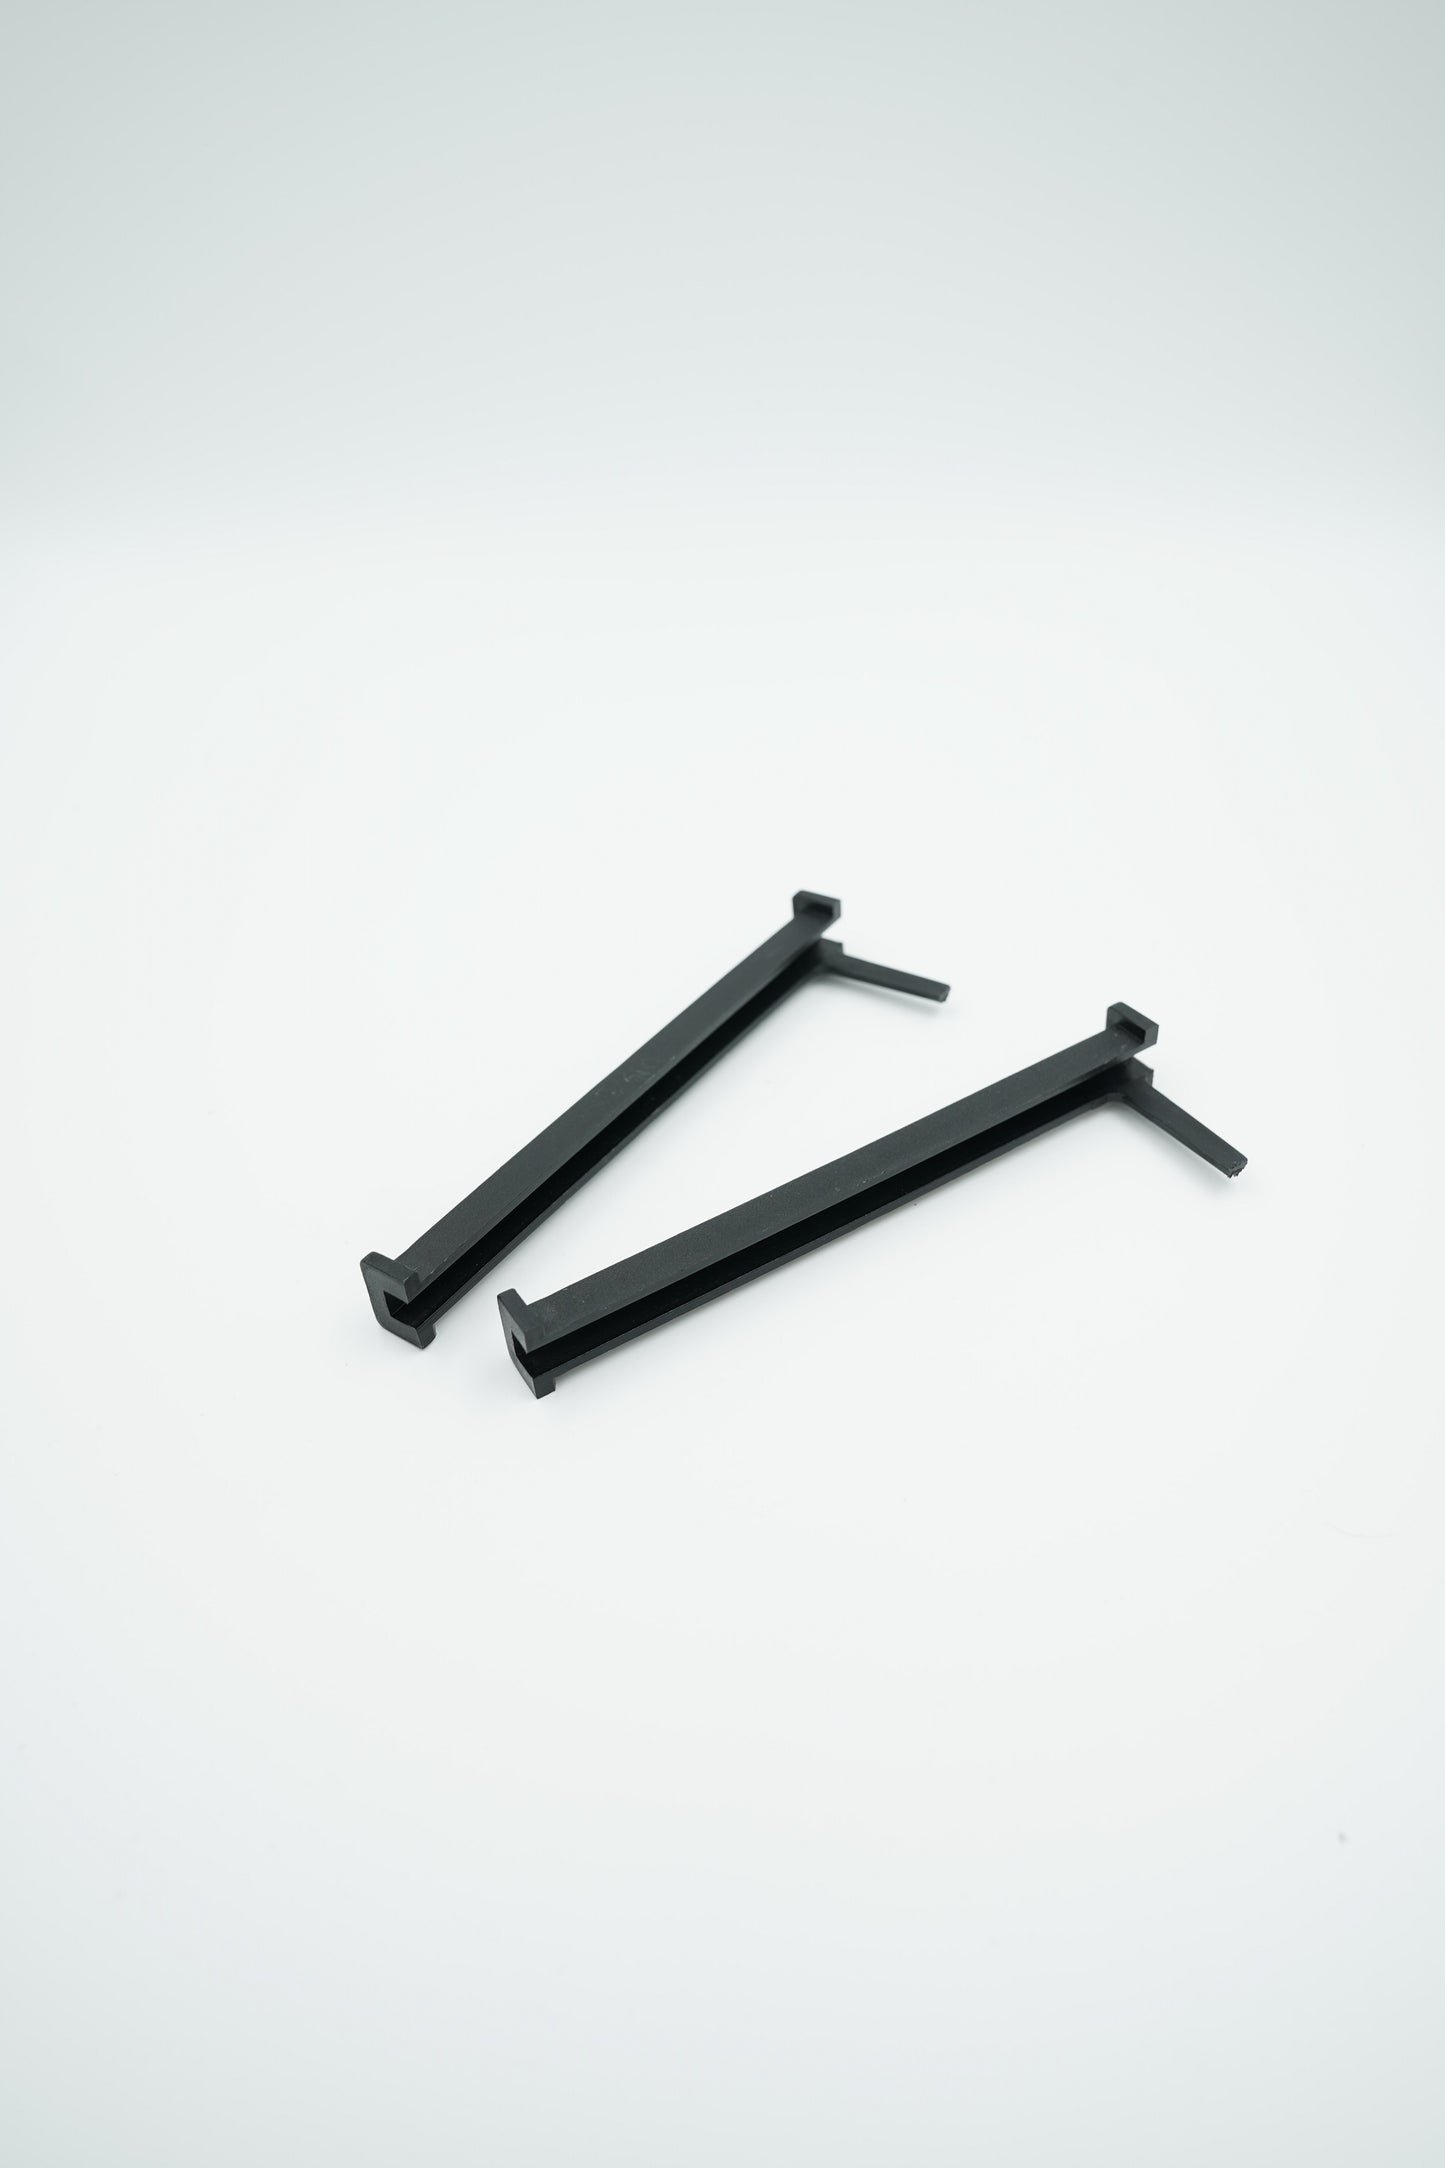 Ronstan 32 T-track Slide Liners (pair) for J/80